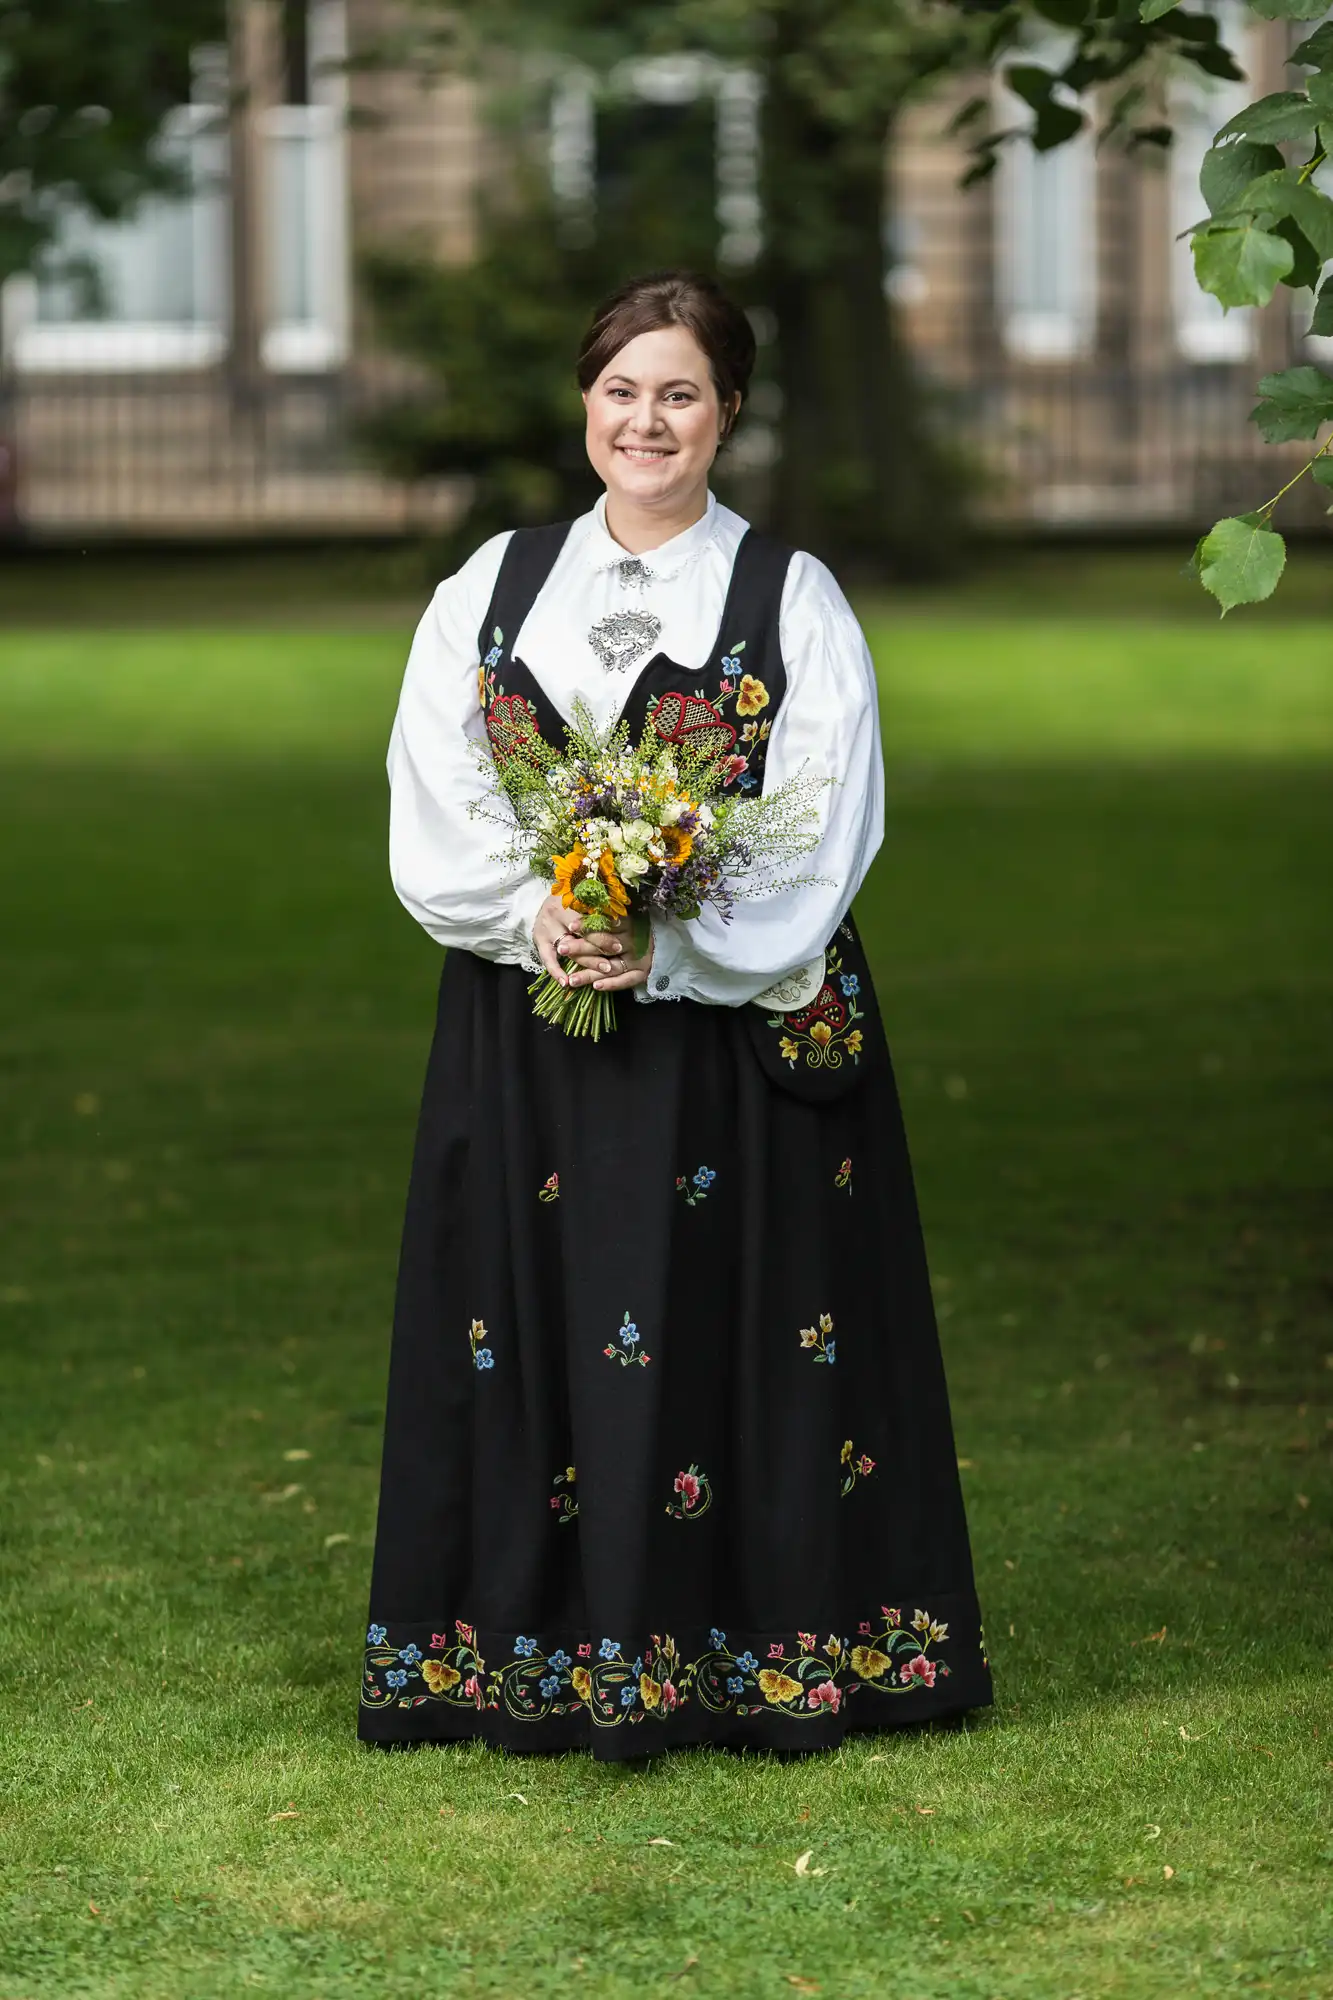 Woman in traditional norwegian bunad with embroidered details, holding a bouquet, smiling in a garden.